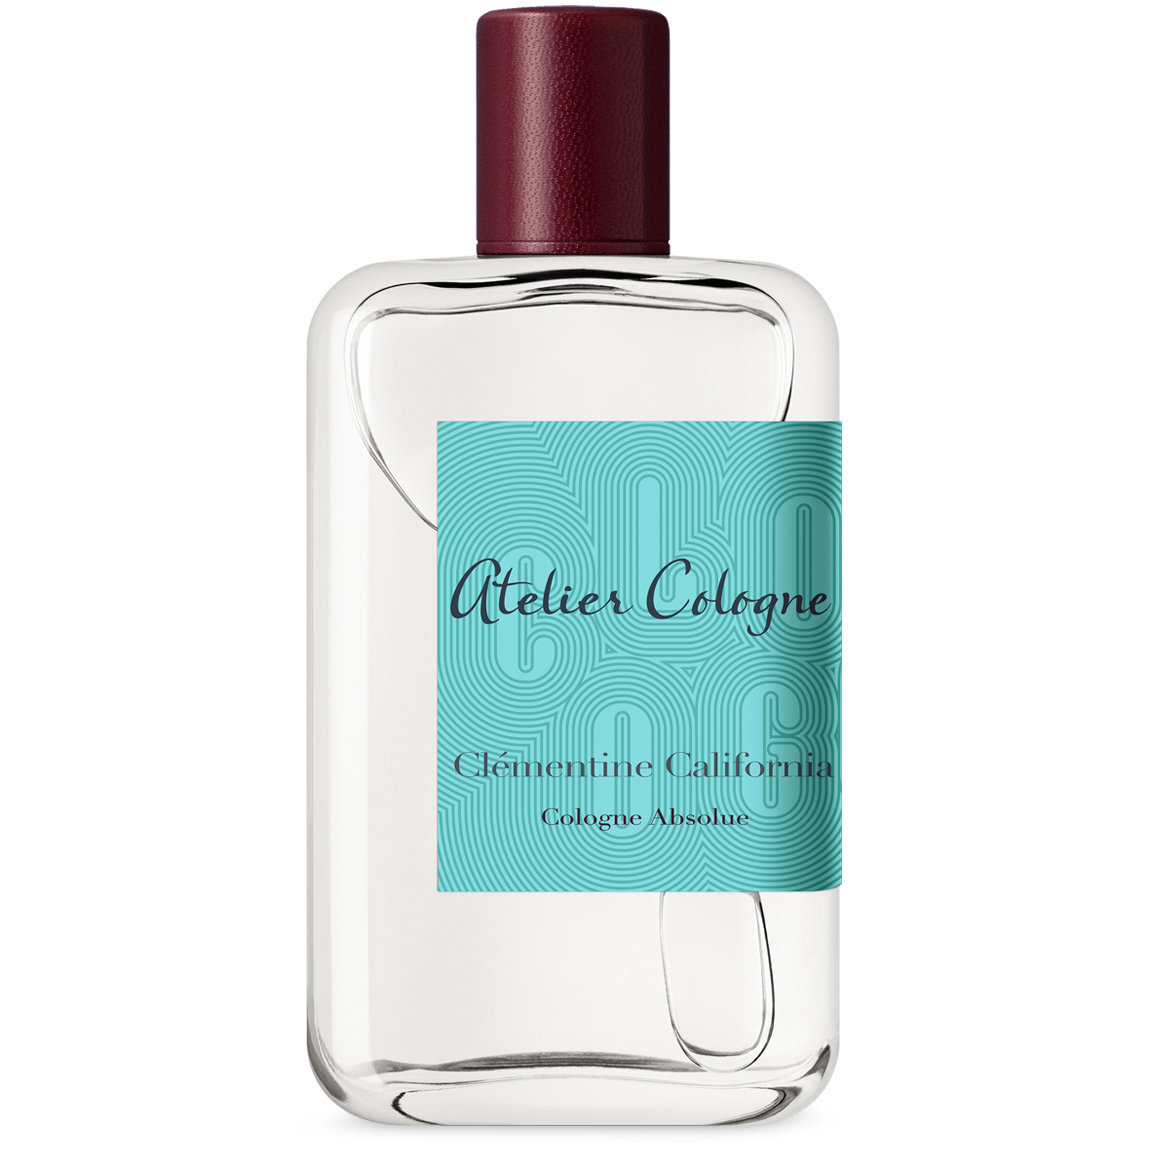 Atelier Cologne Clémentine California 200 ml alternative view 1 - product swatch.